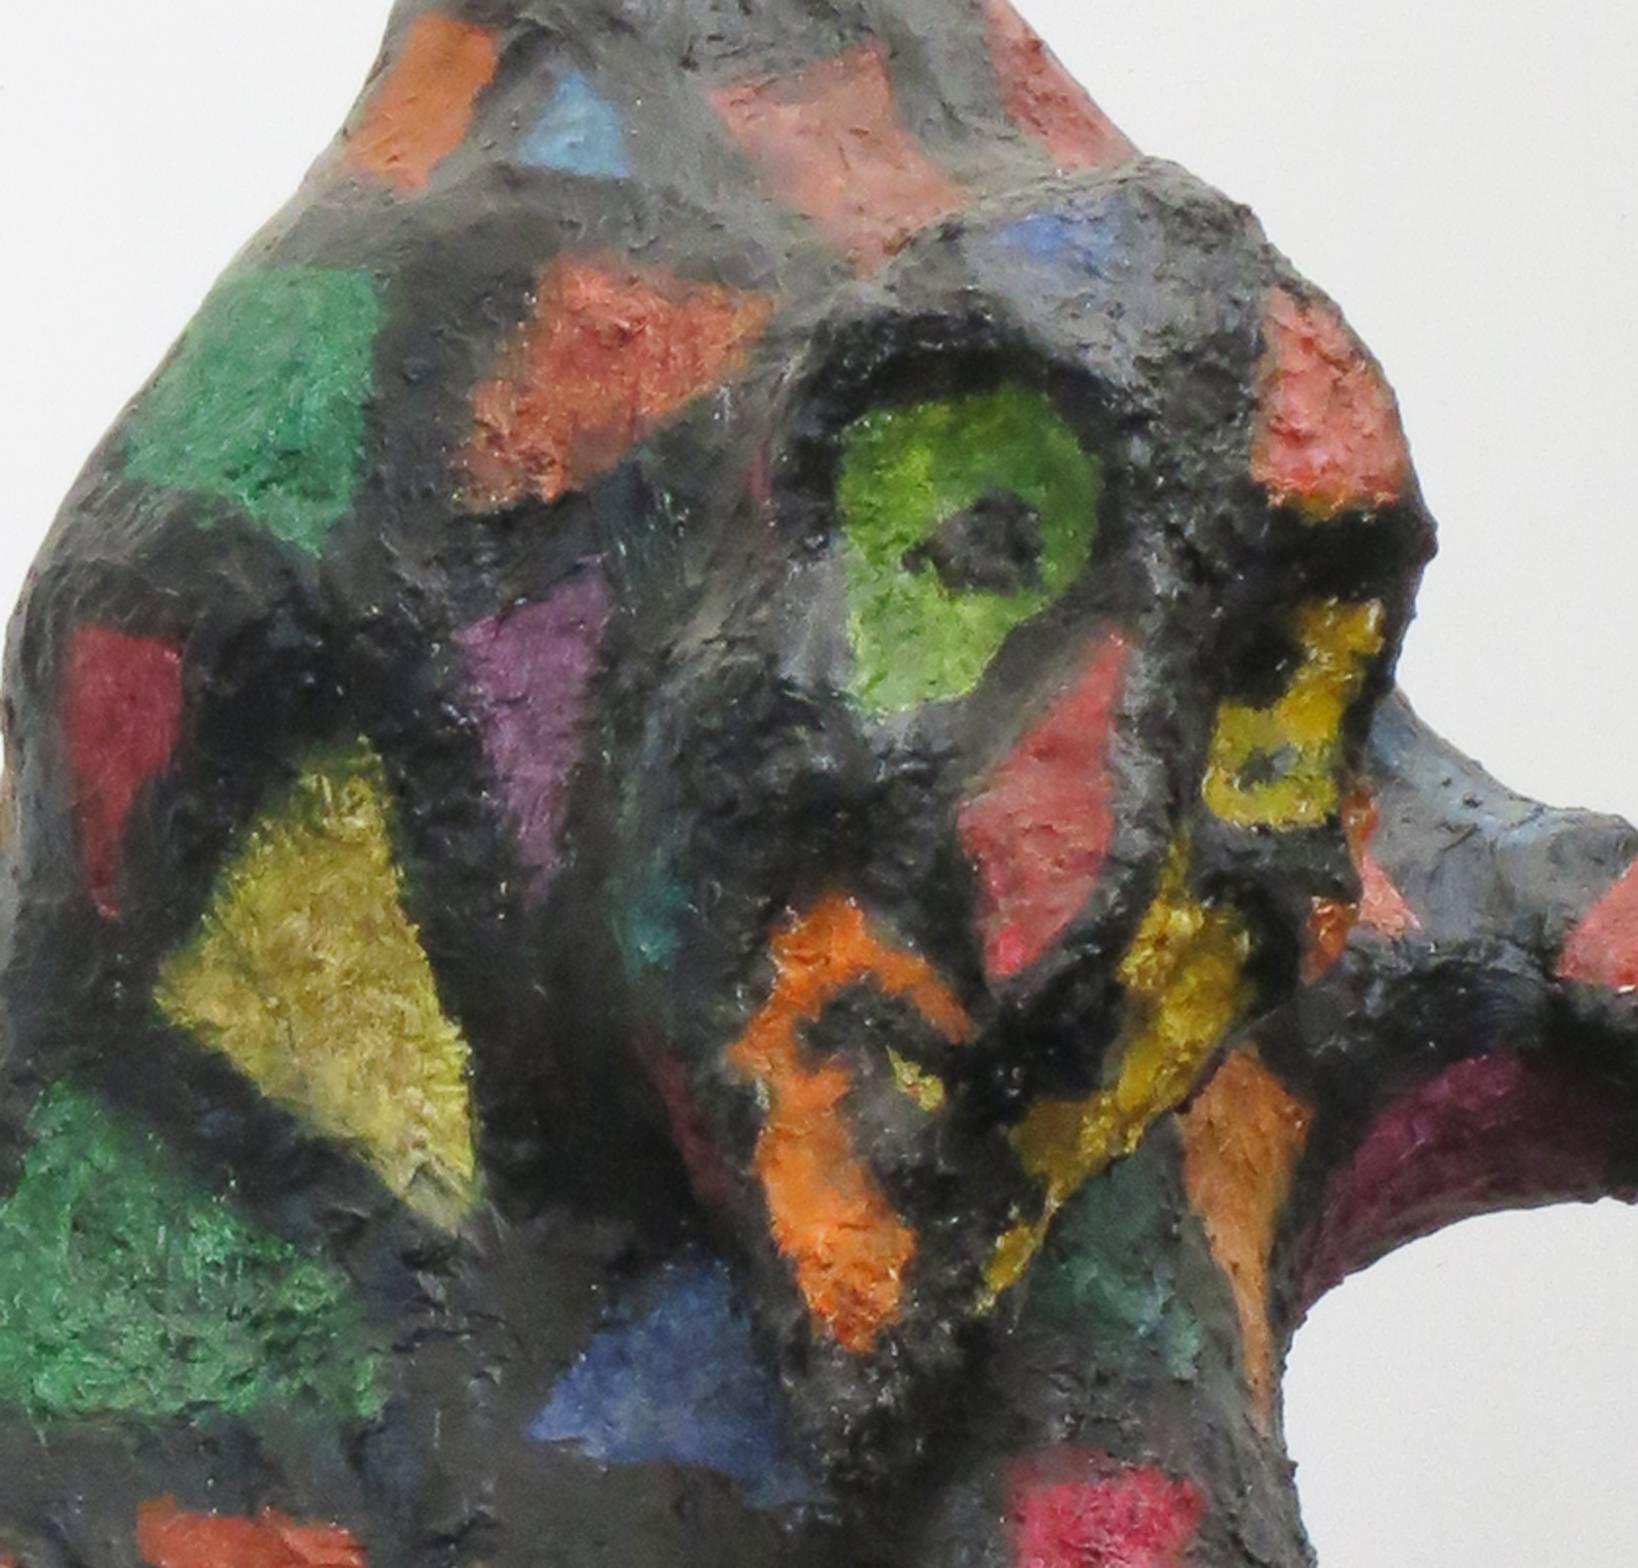 Howard Kalish Abstract Sculpture - "Rigoletto", jester of the Verdi opera, in colorful diamond-patterned costume